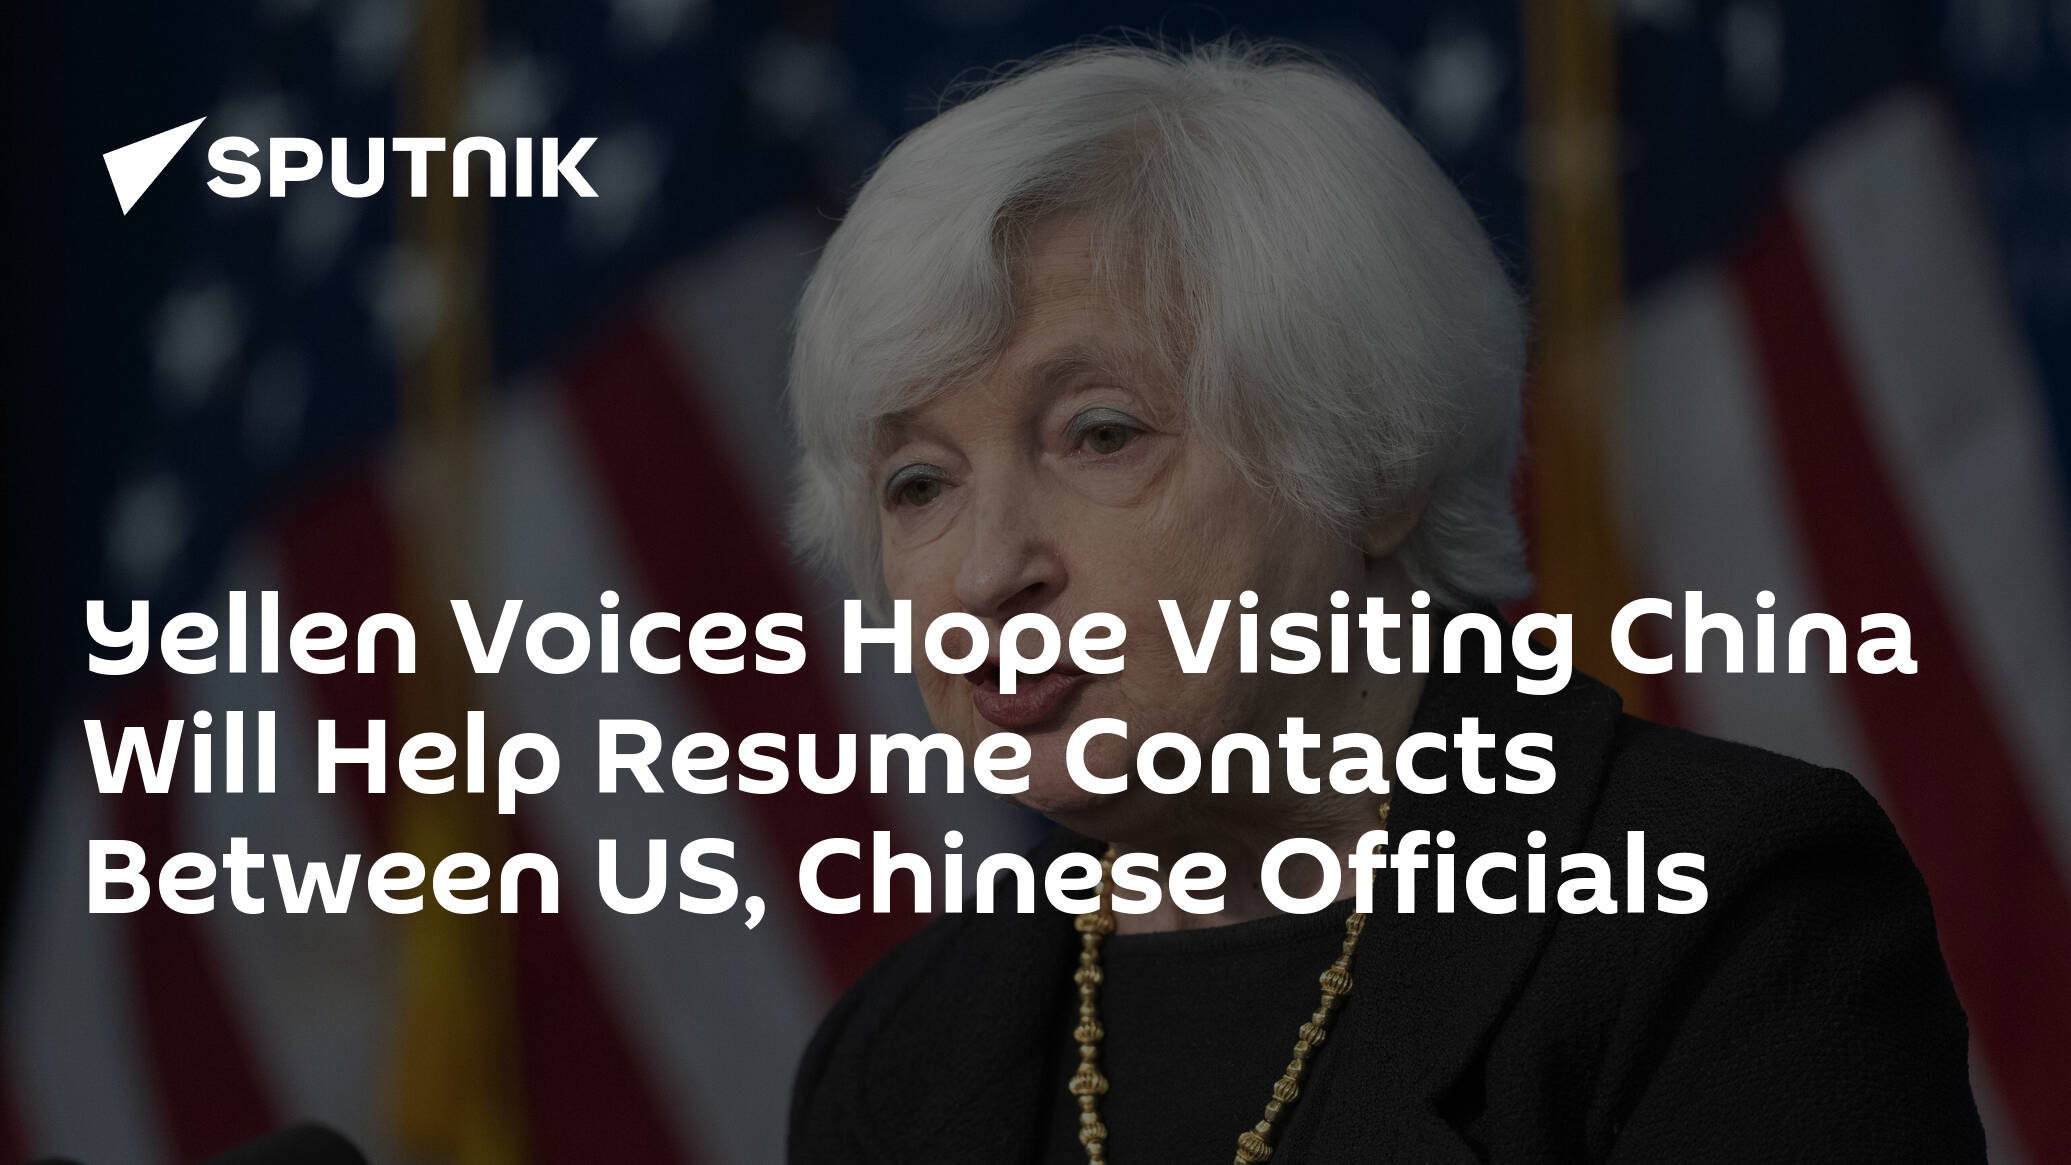 Yellen Voices Hope Visiting China Will Help Resume Contacts Between US, Chinese Officials